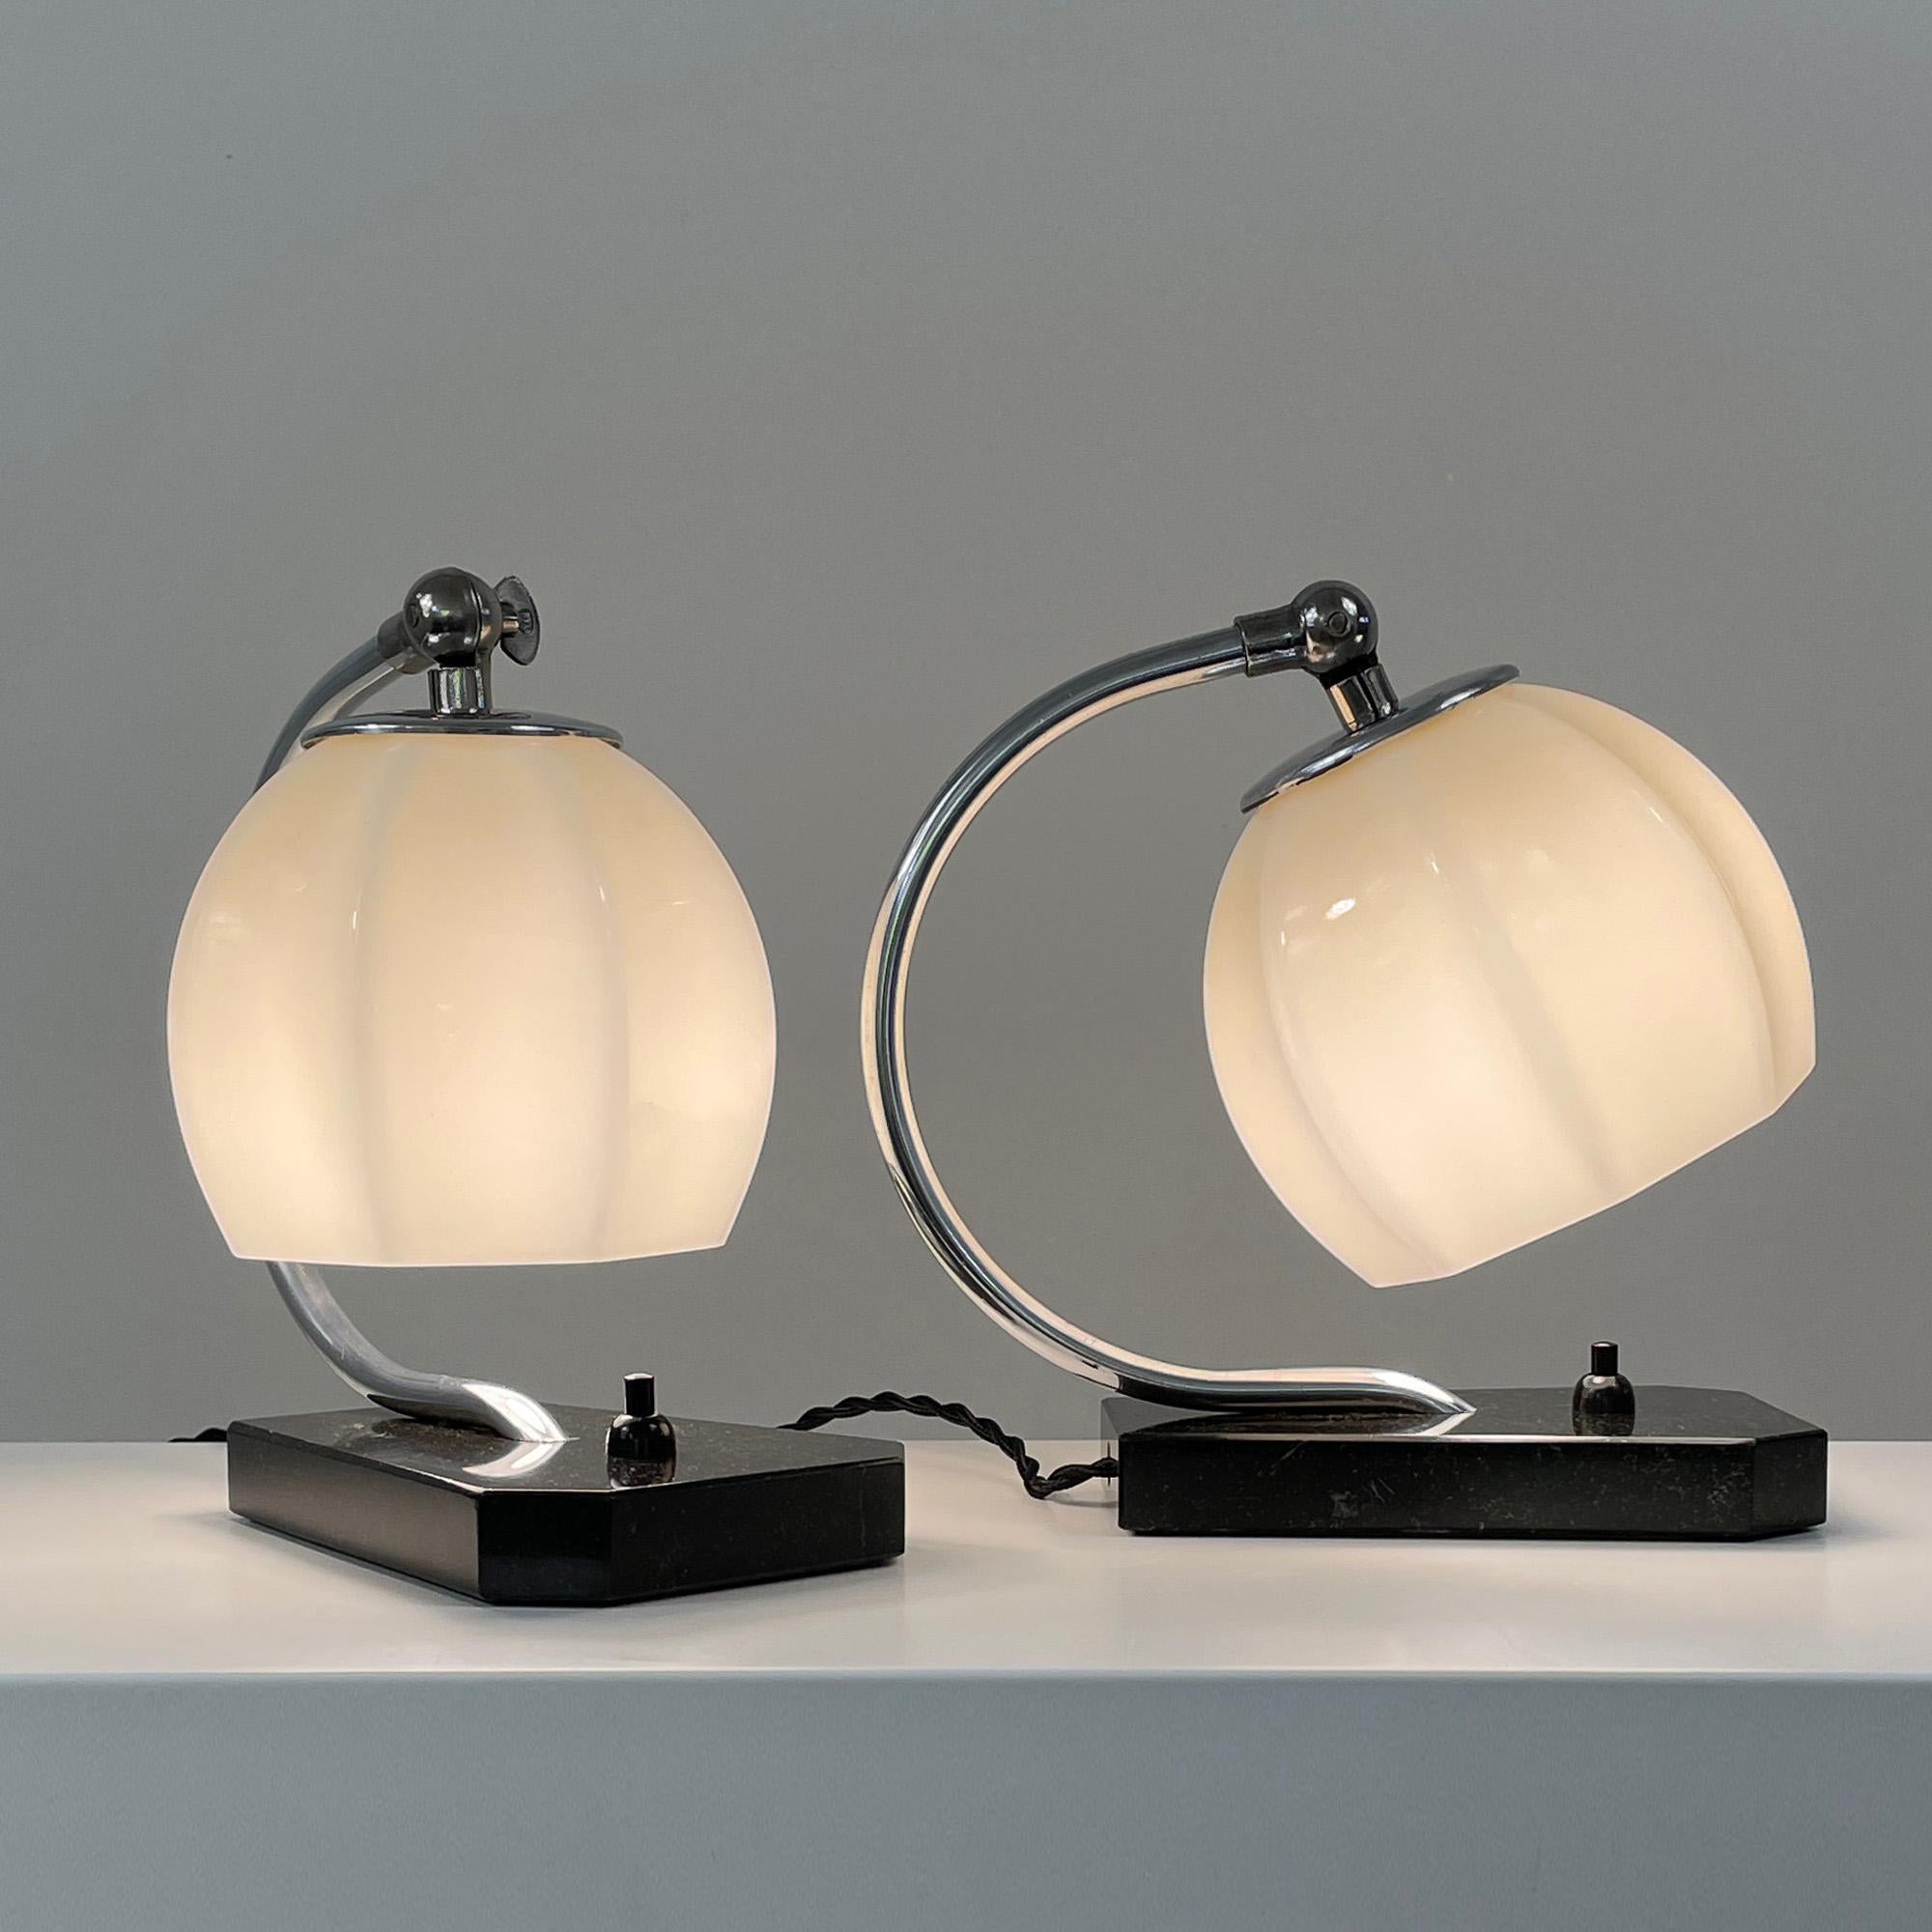 German Art Deco Opaline Glass, Marble and Aluminum Table Lamps, 1930s For Sale 3